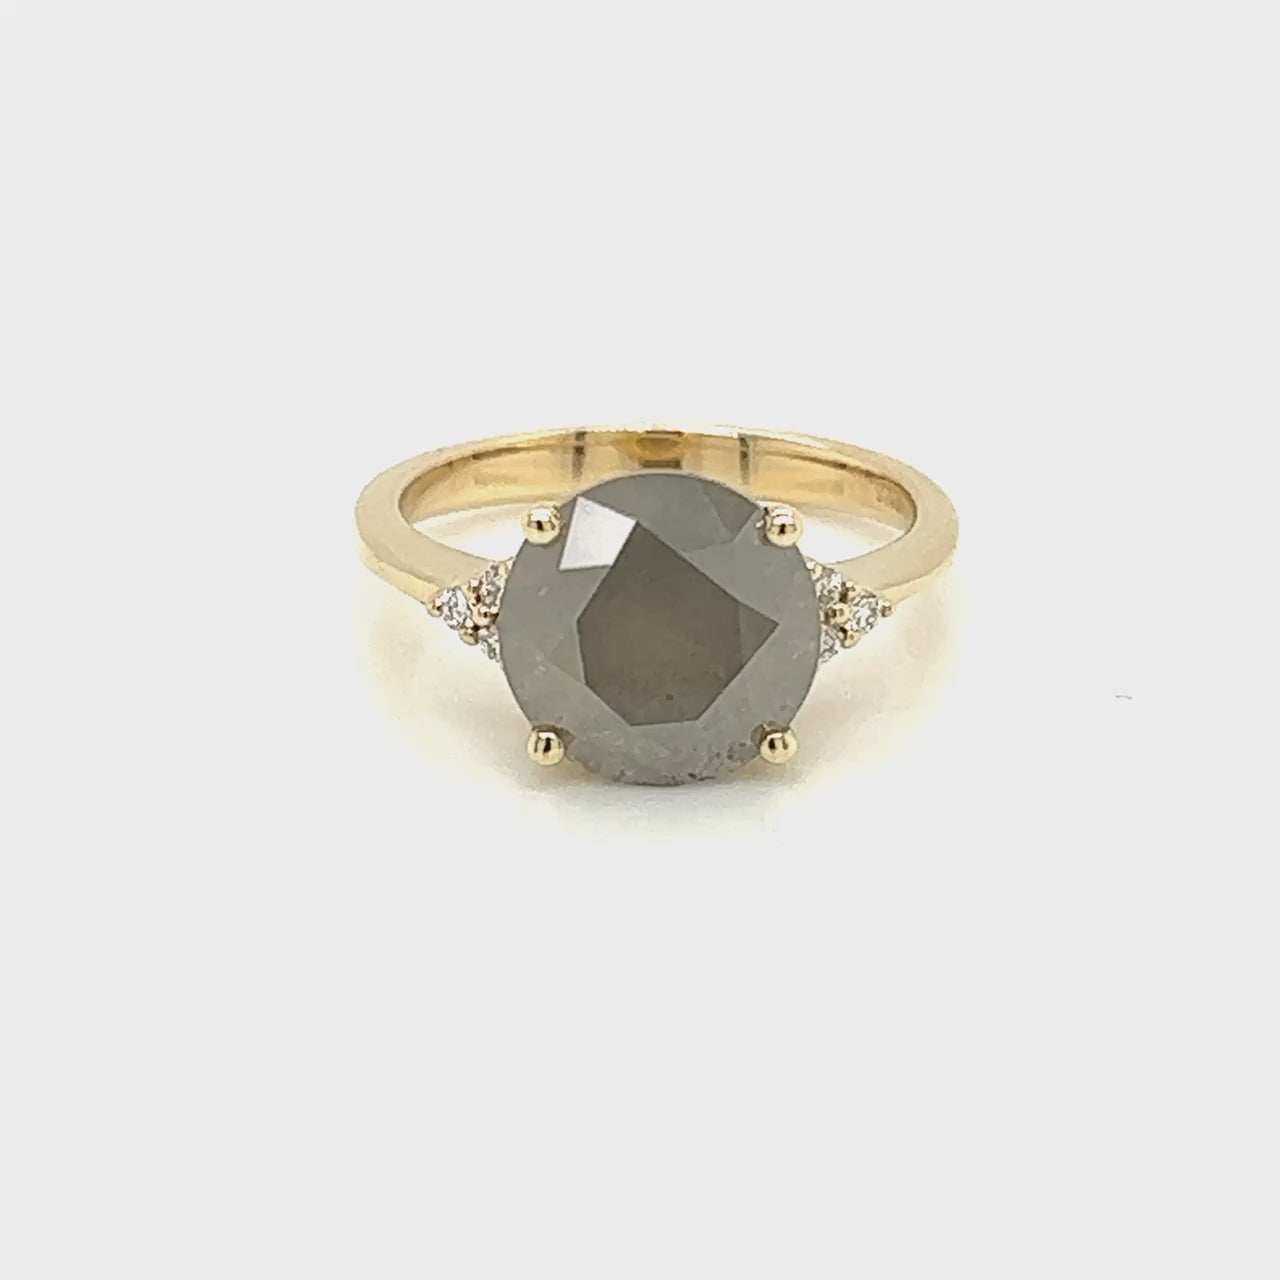 Sunset Imogene Ring with a 4.01 Carat Round Gray Salt and Pepper Diamond and White Accent Diamonds in 14k Yellow Gold - Ready to Size and Ship